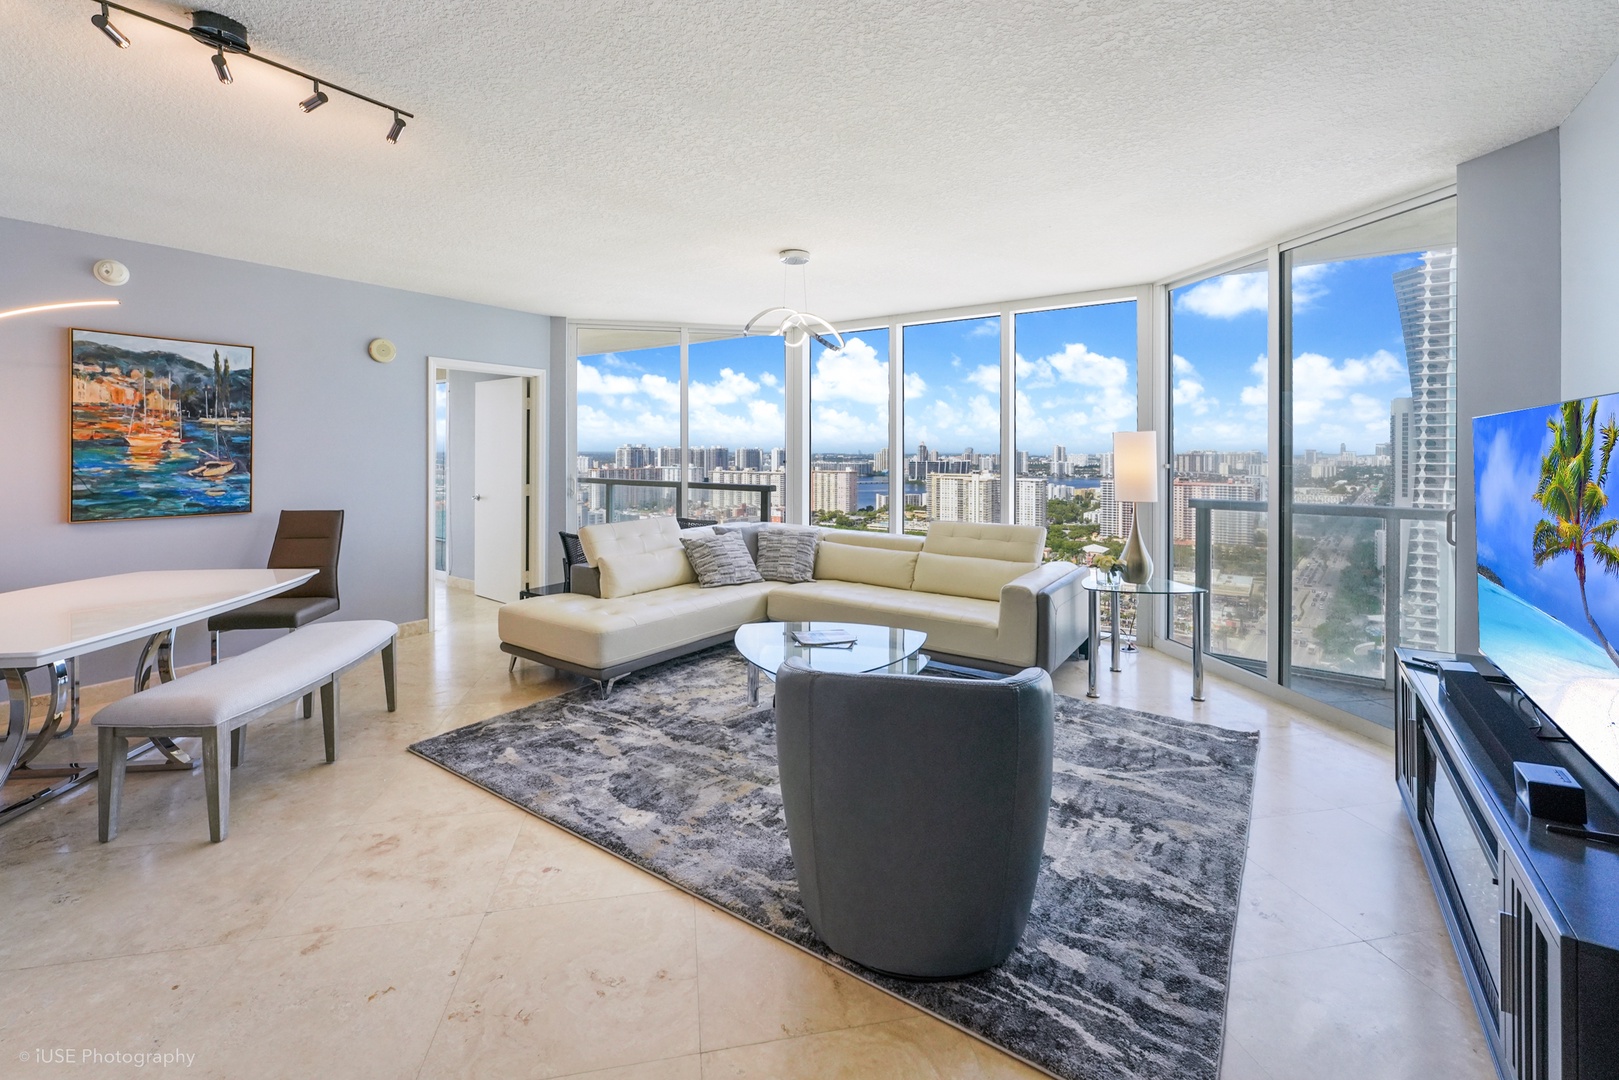 Bright living area with ample seating, TV, and stunning view